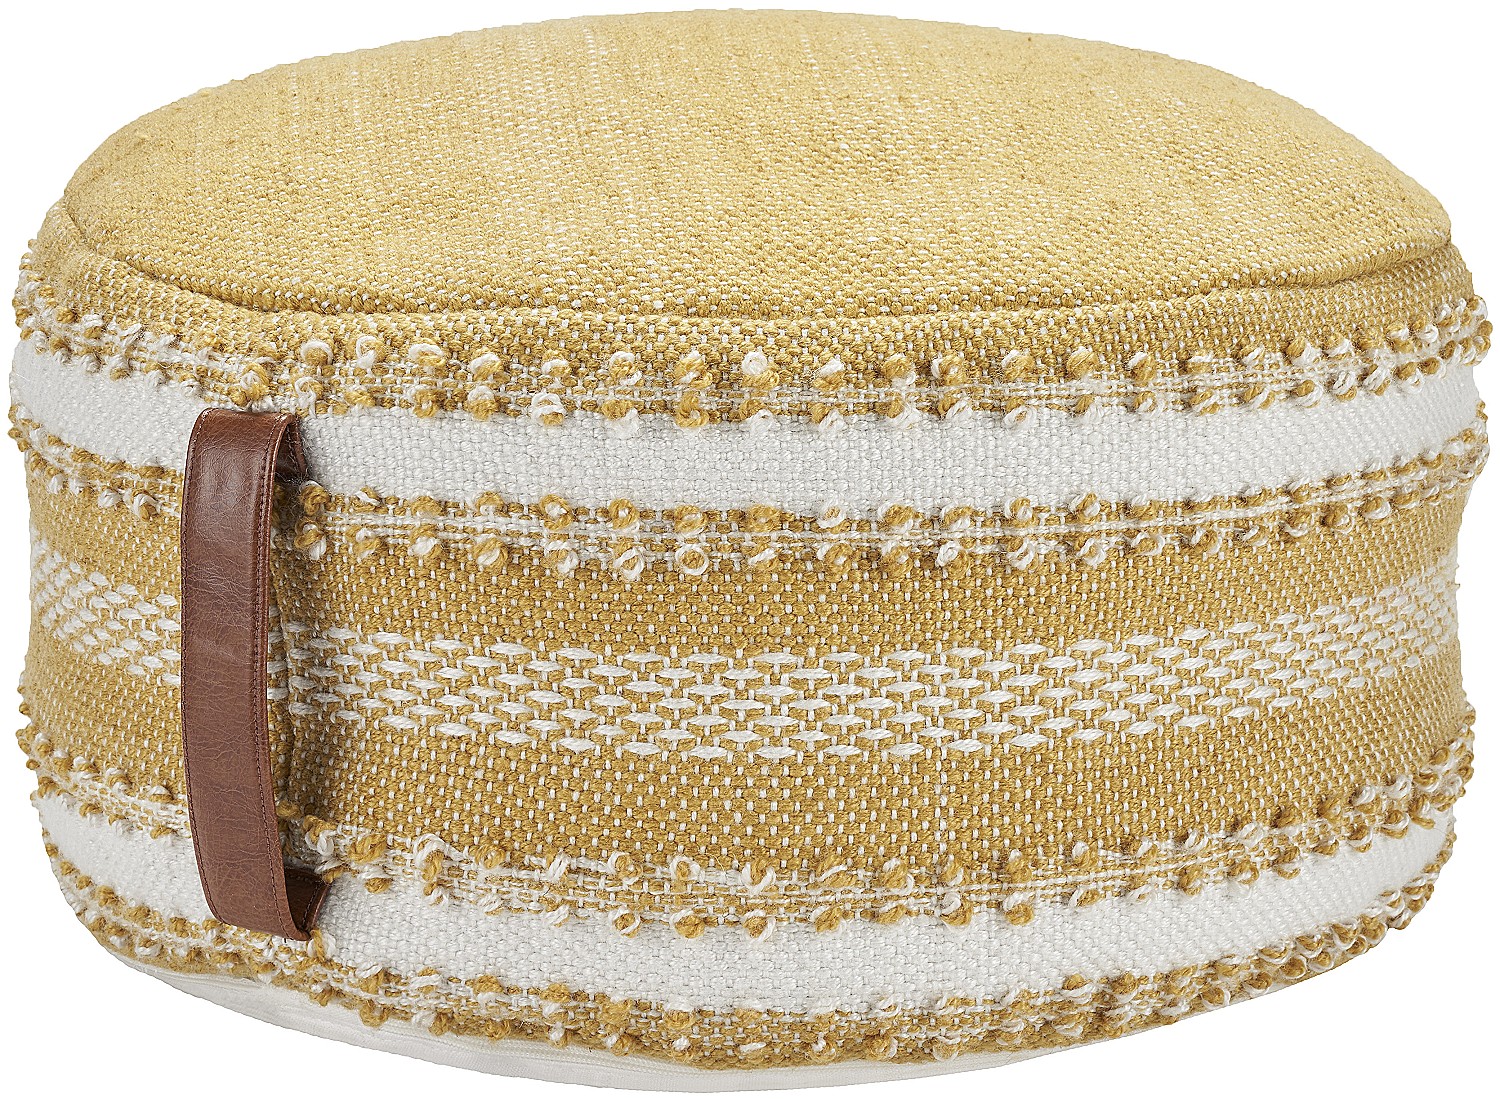 Mina Victory  Woven Stripes & Dots 20" x 20" x 12" Yellow Outdoor Poufs - image 1 of 4